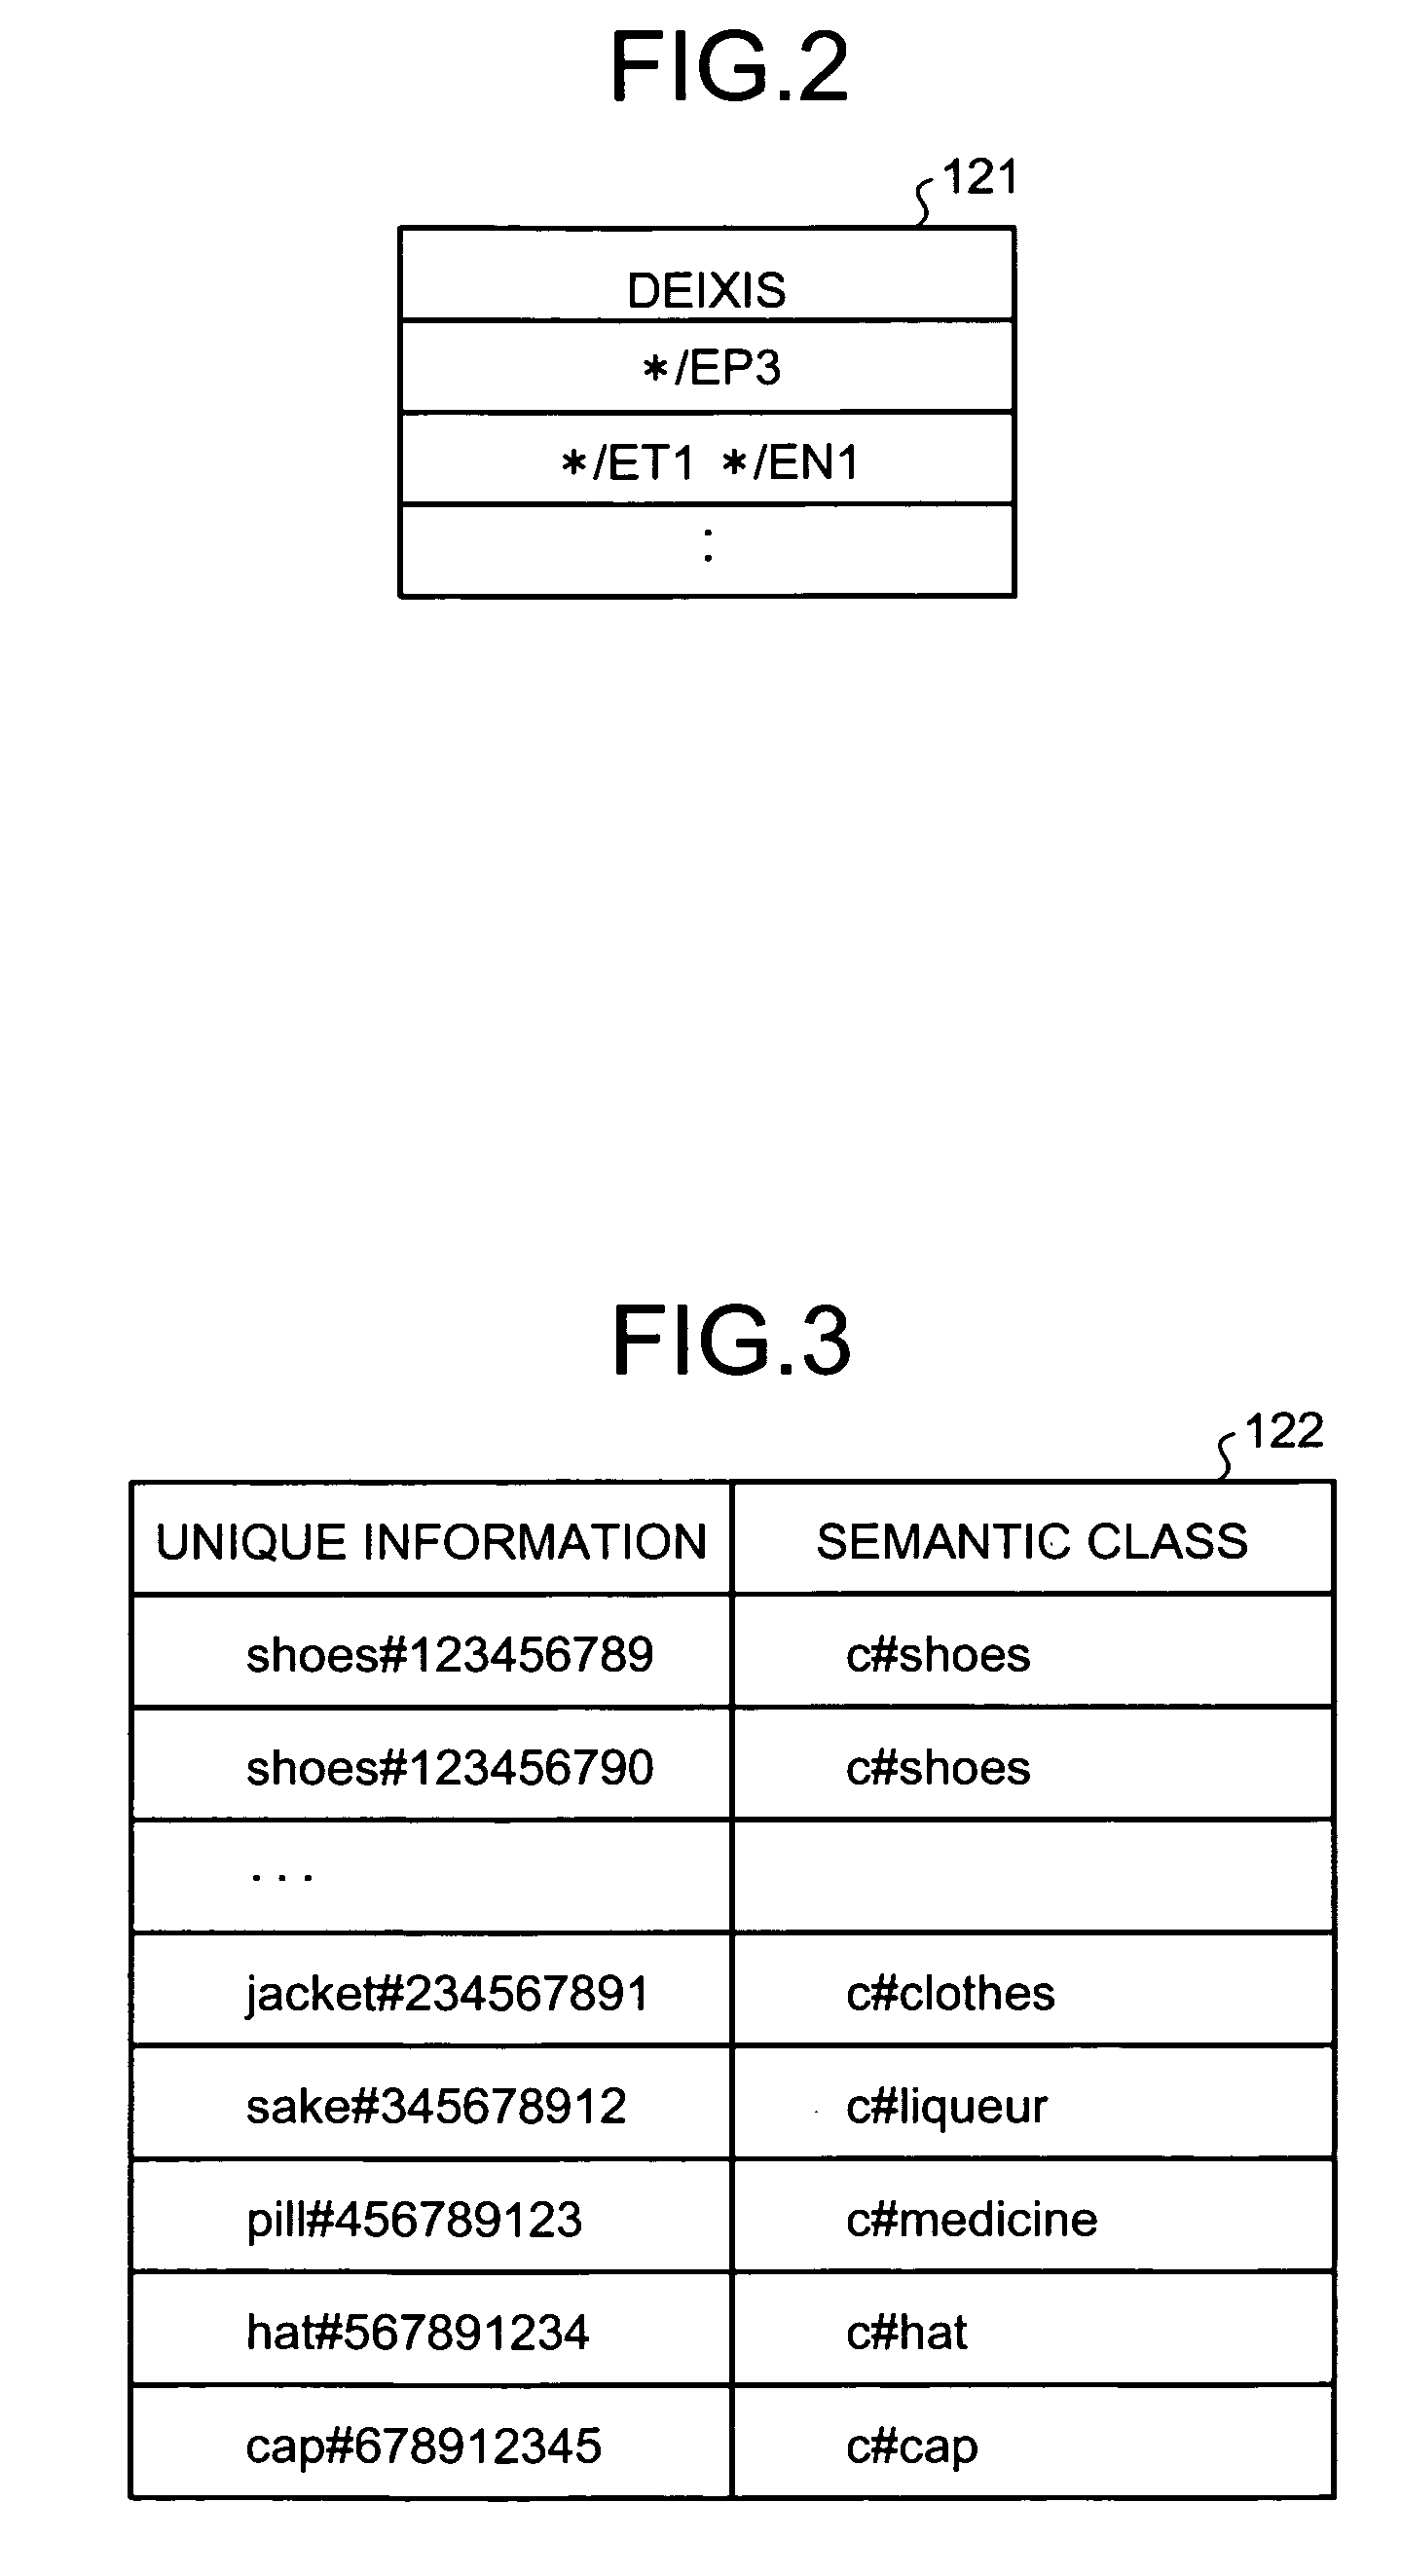 Apparatus, method and computer program product for optimum translation based on semantic relation between words